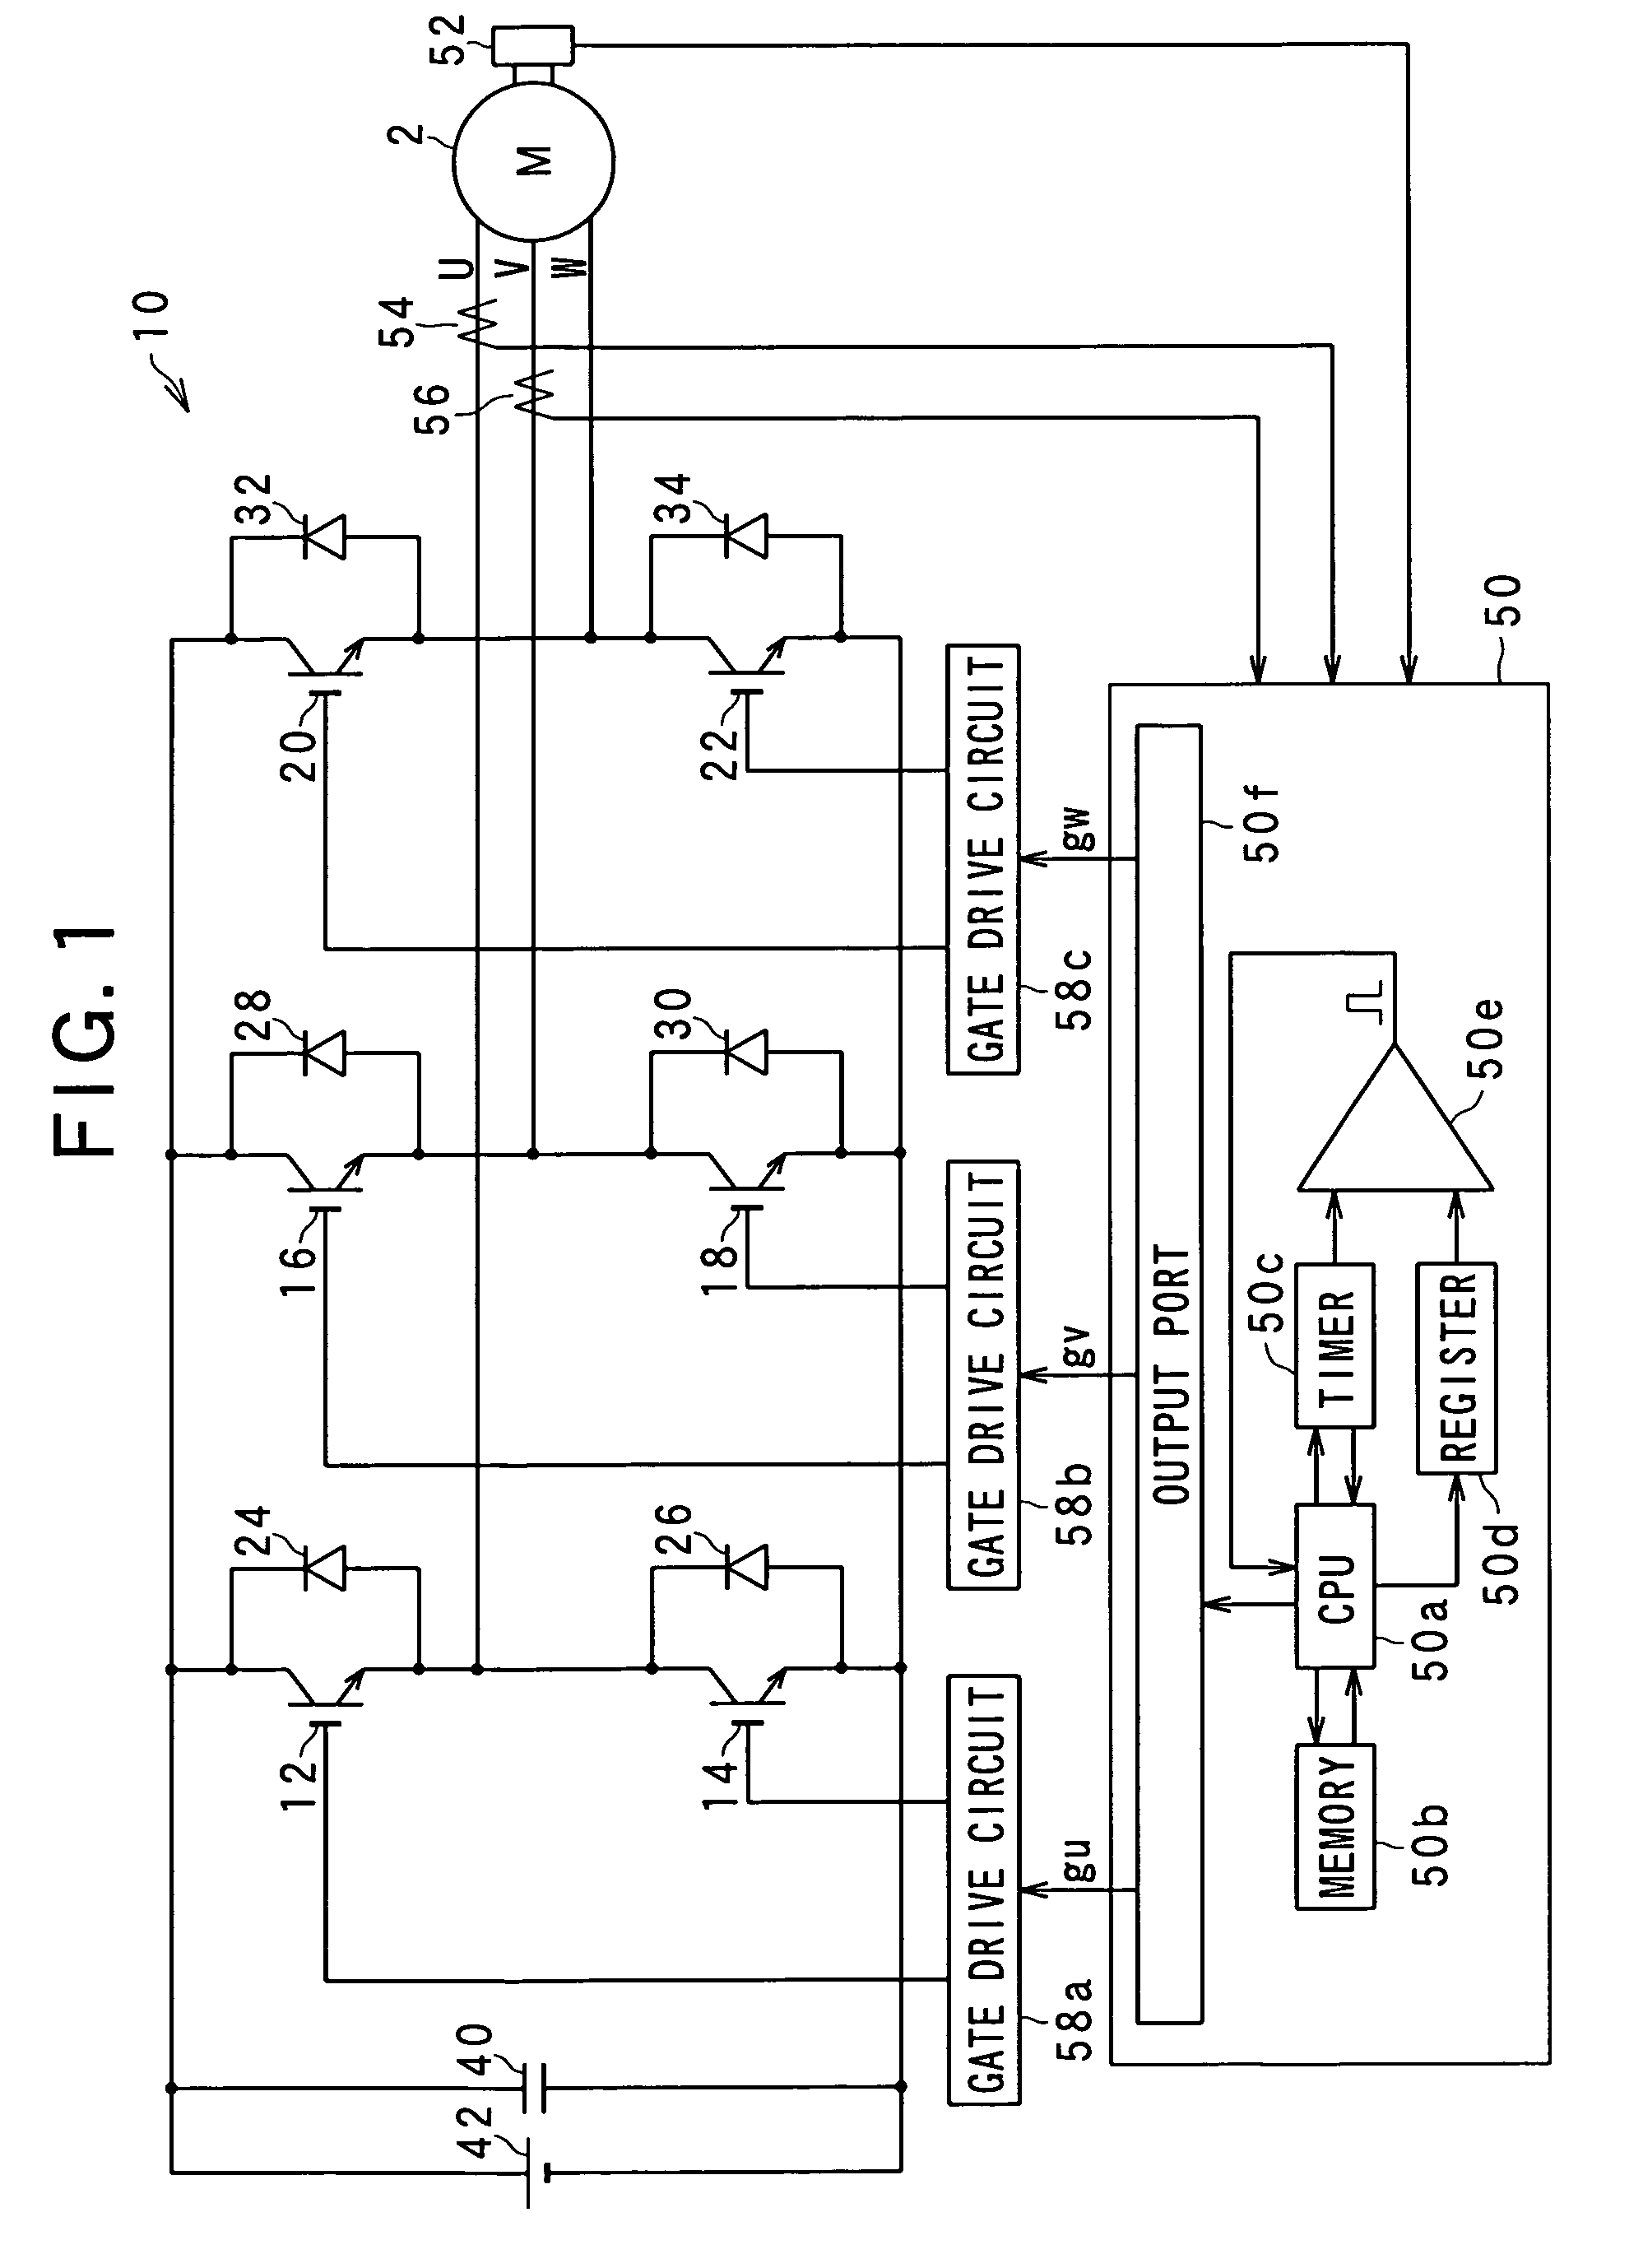 Rotating machinery controller